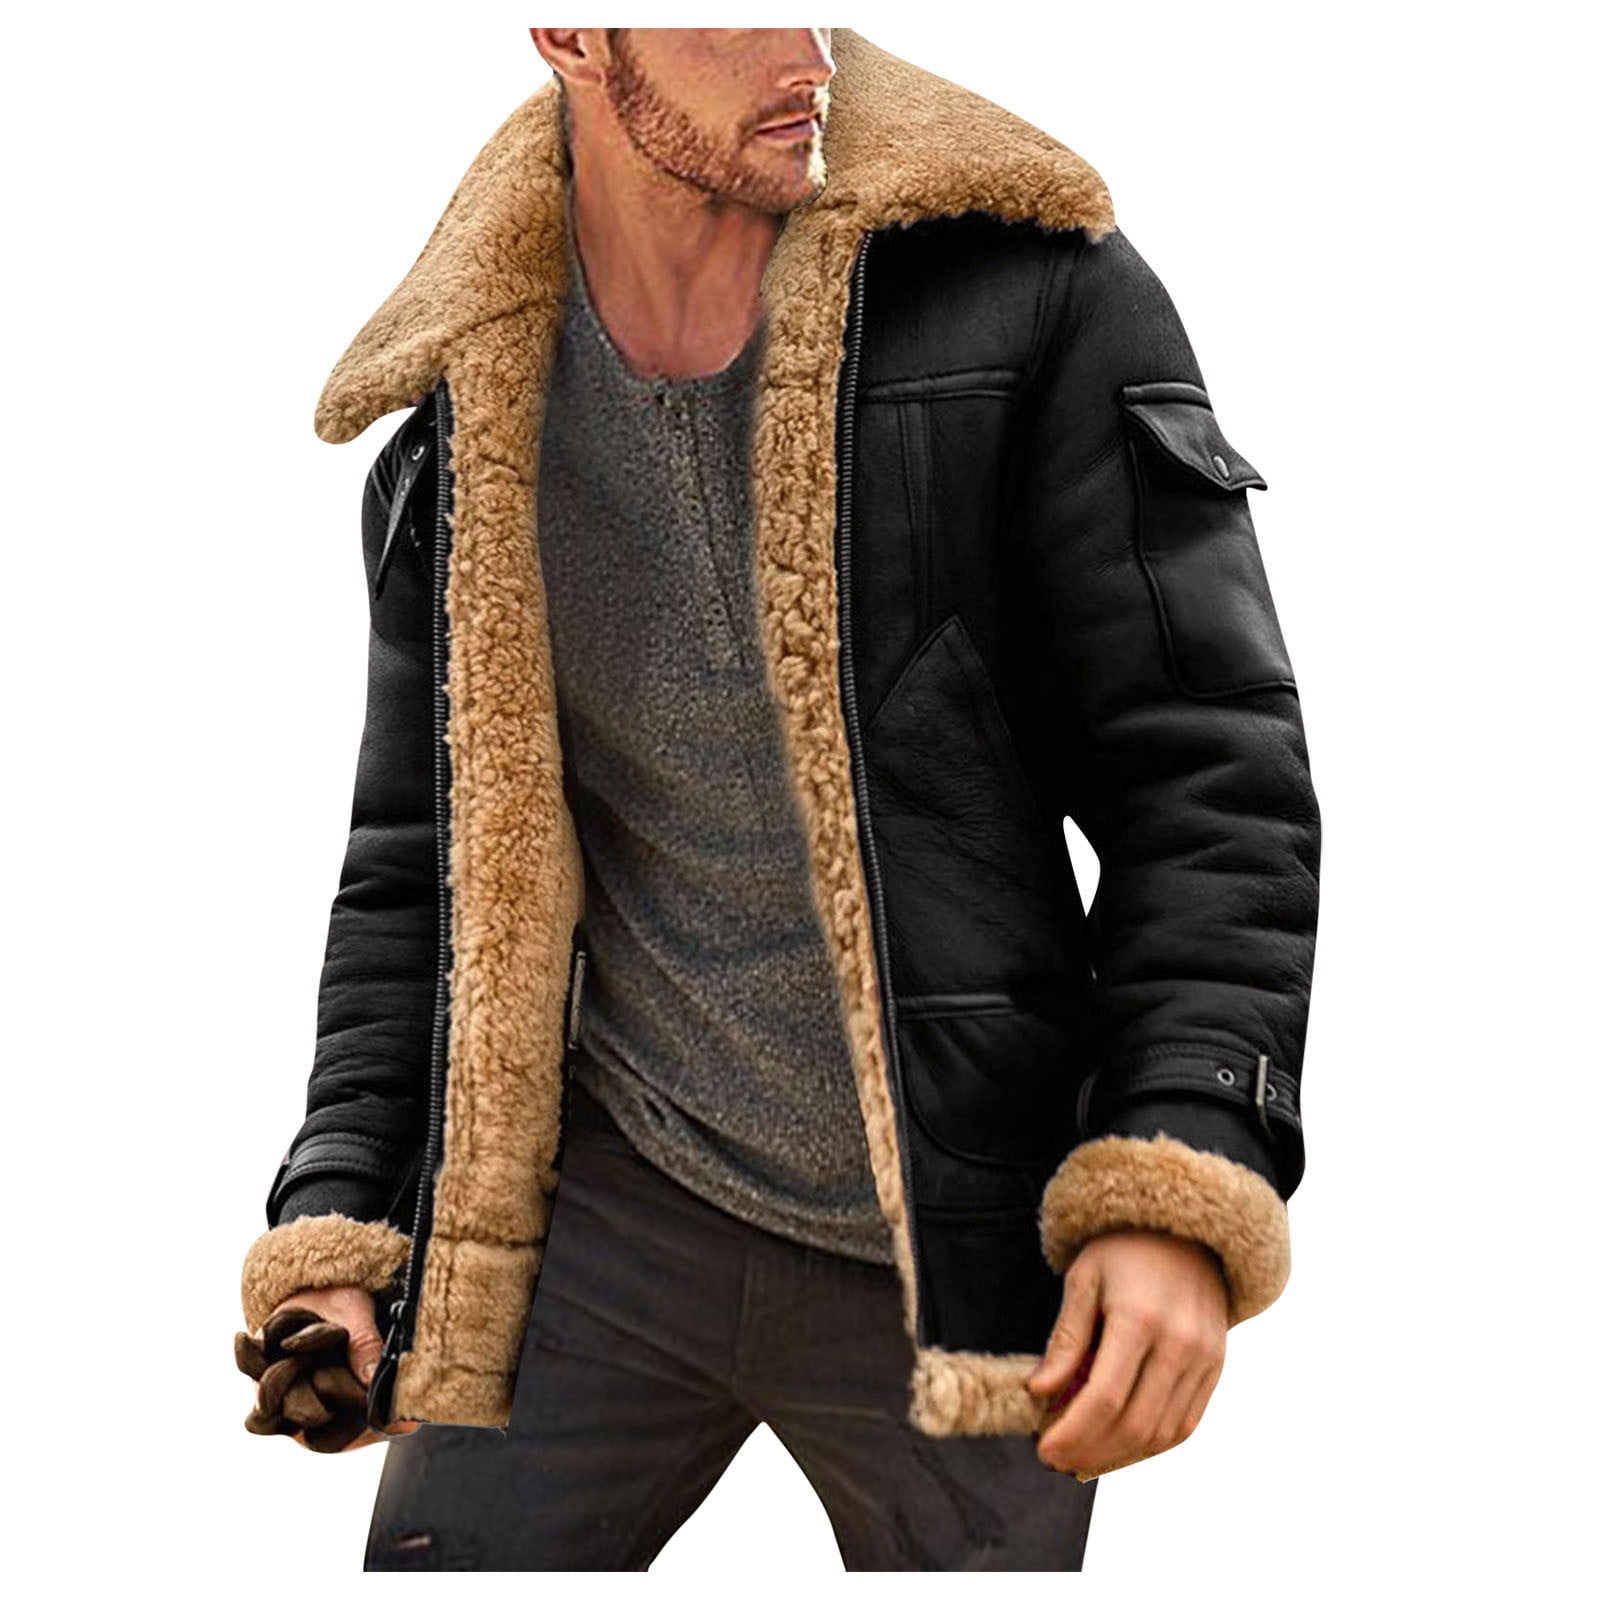 Olyvenn Winter Warm Men's Fashion Casual Cotton Jacket Cashmere Thickened  Long Sleeve Lapel Oversize Coat Outwear Padded Sports Fitness Overcoat  Black 8 